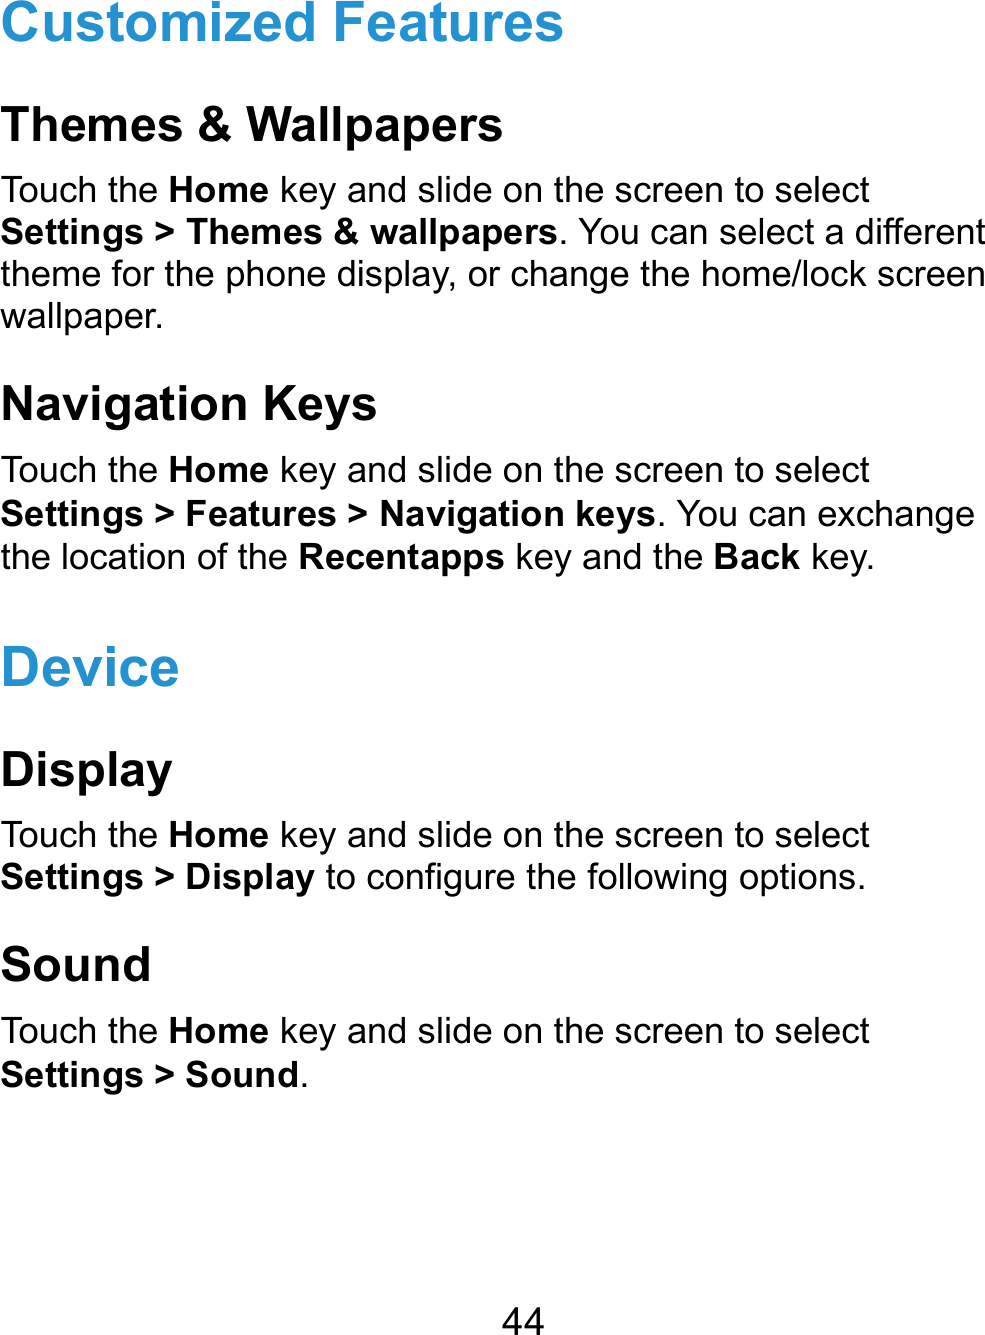  44 Customized Features Themes &amp; Wallpapers Touch the Home key and slide on the screen to select Settings &gt; Themes &amp; wallpapers. You can select a different theme for the phone display, or change the home/lock screen wallpaper. Navigation Keys Touch the Home key and slide on the screen to select Settings &gt; Features &gt; Navigation keys. You can exchange the location of the Recentapps key and the Back key. Device Display Touch the Home key and slide on the screen to select Settings &gt; Display to configure the following options. Sound Touch the Home key and slide on the screen to select Settings &gt; Sound.   